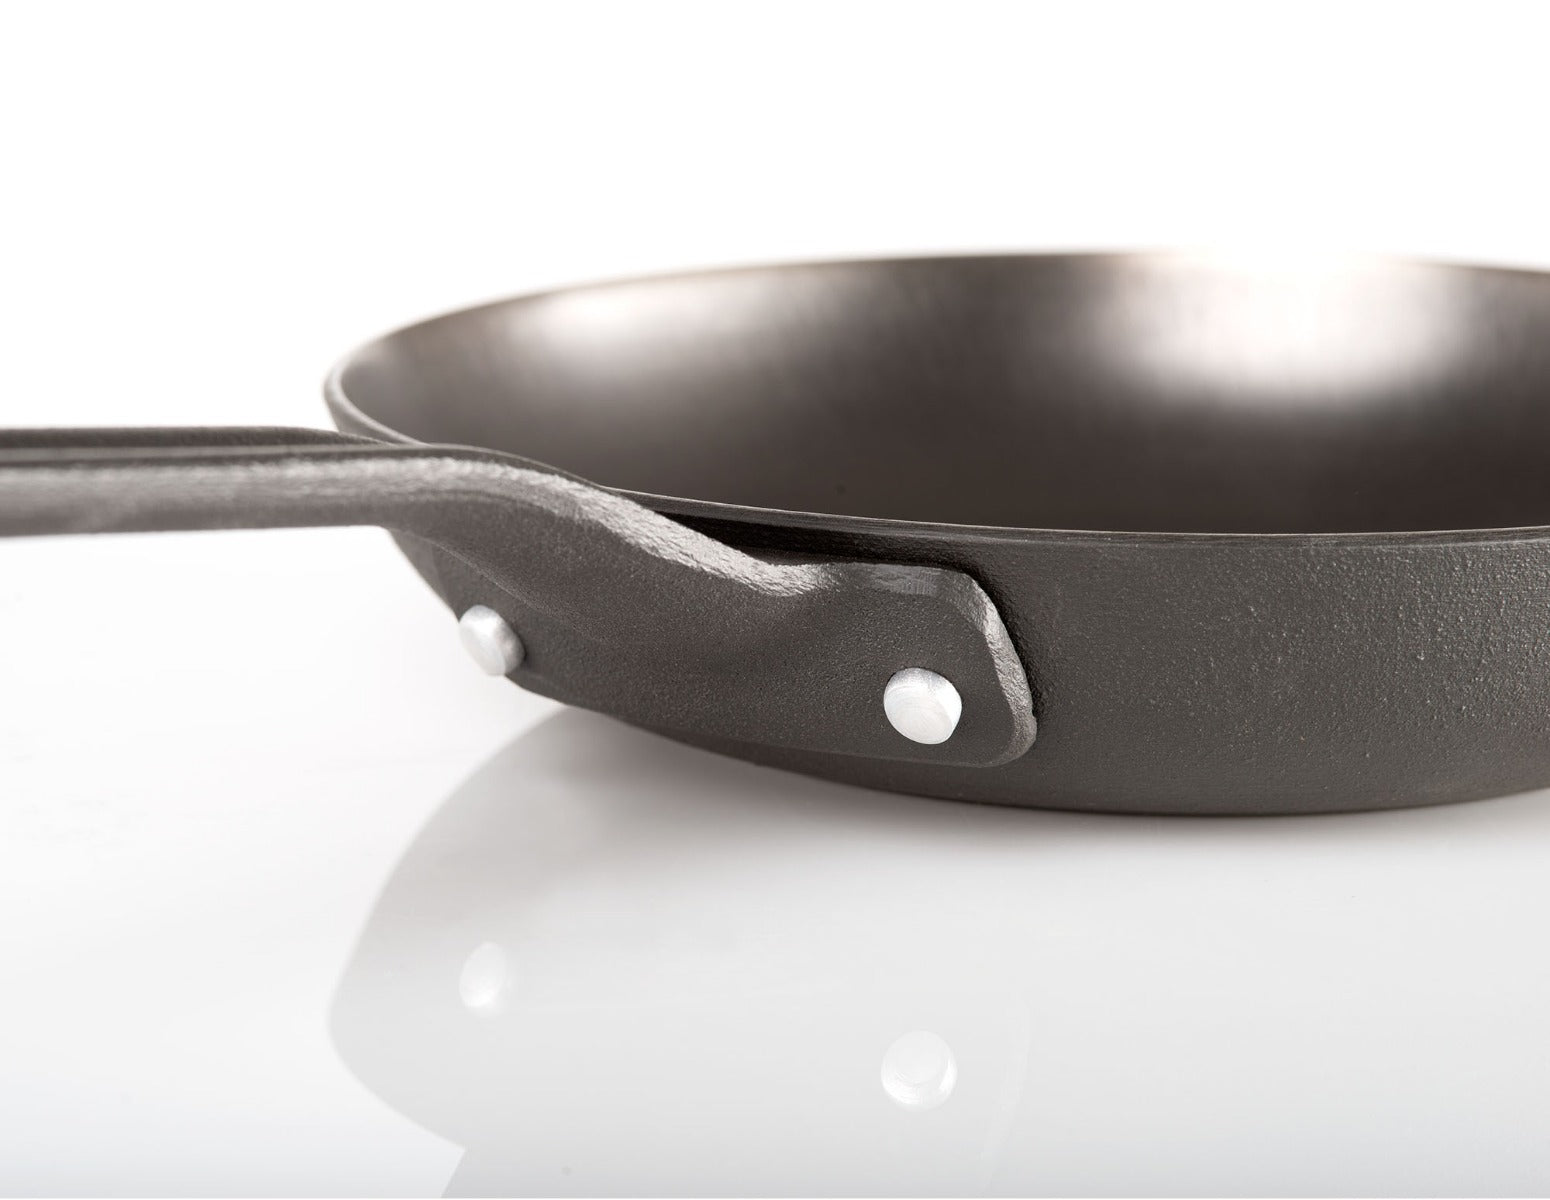 GUIDECAST 12 inch Frying Pan